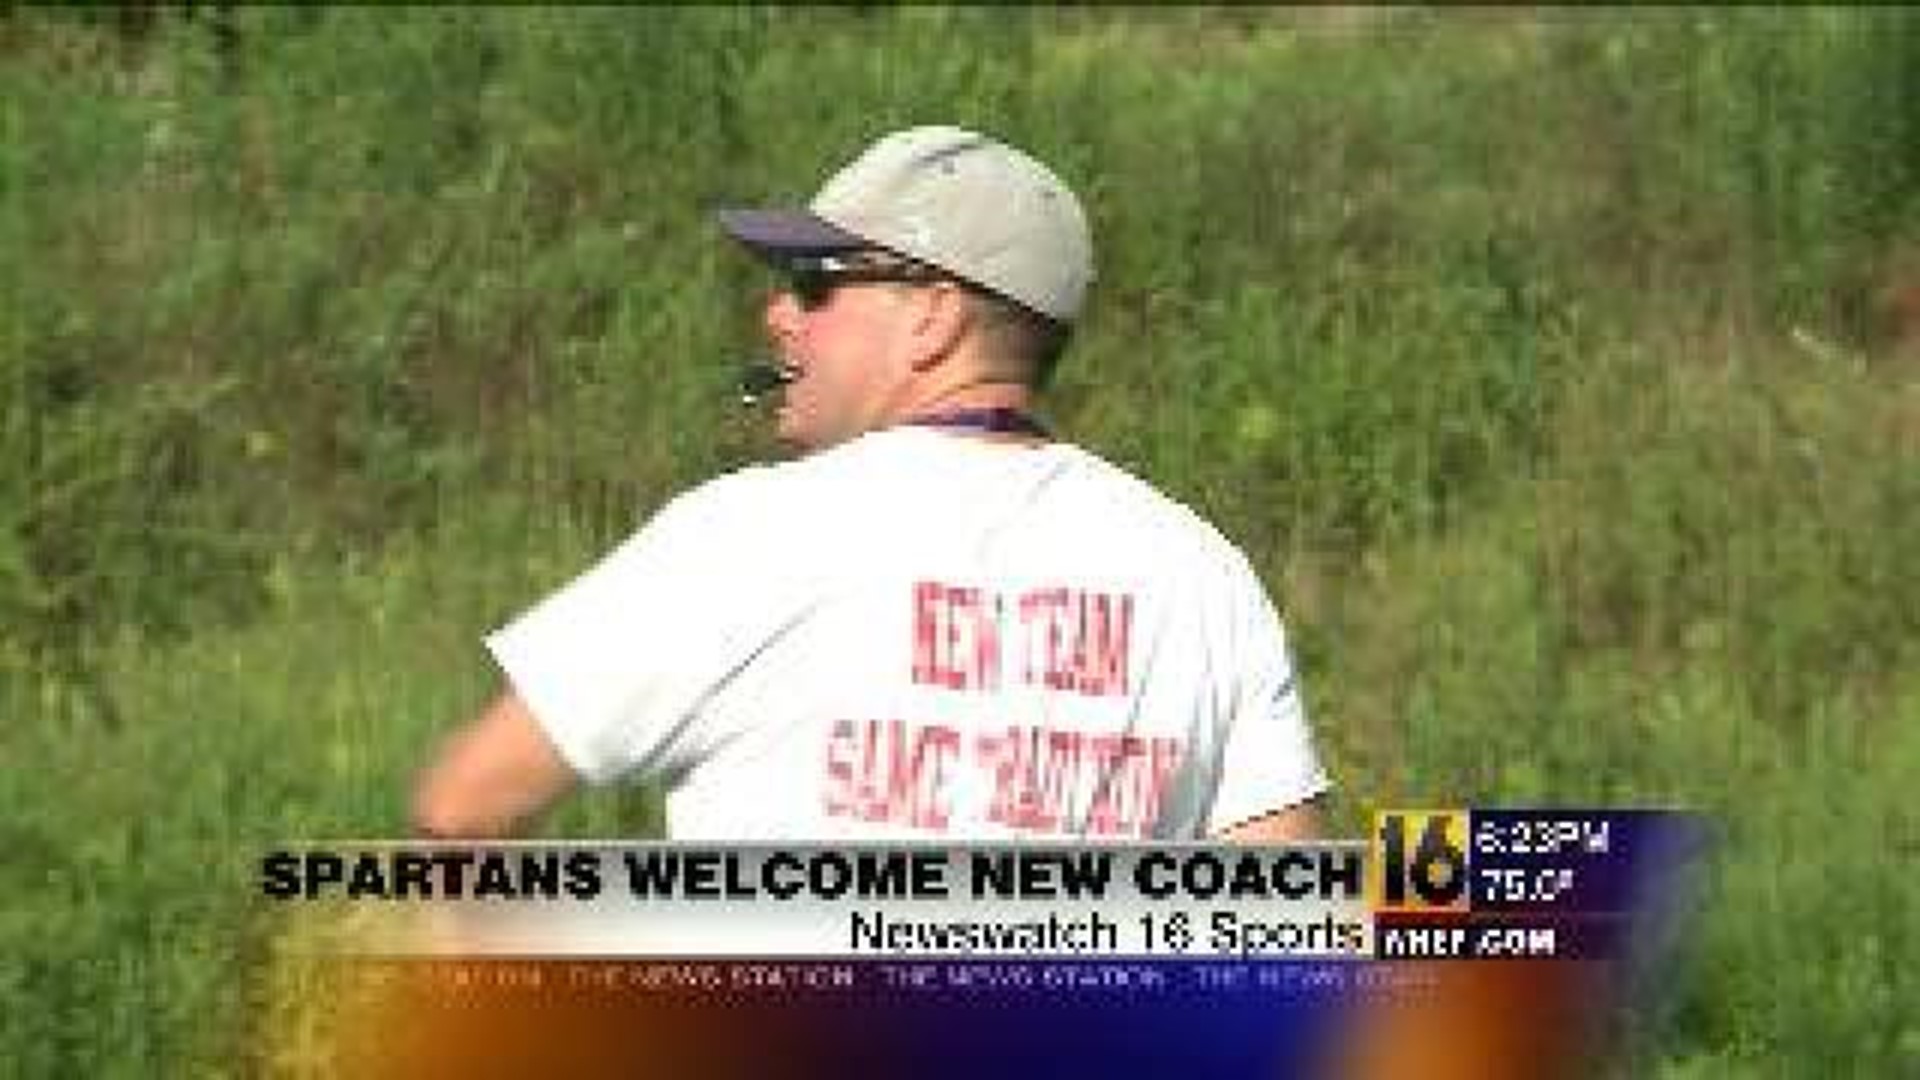 North Schuylkill welcomes new coach